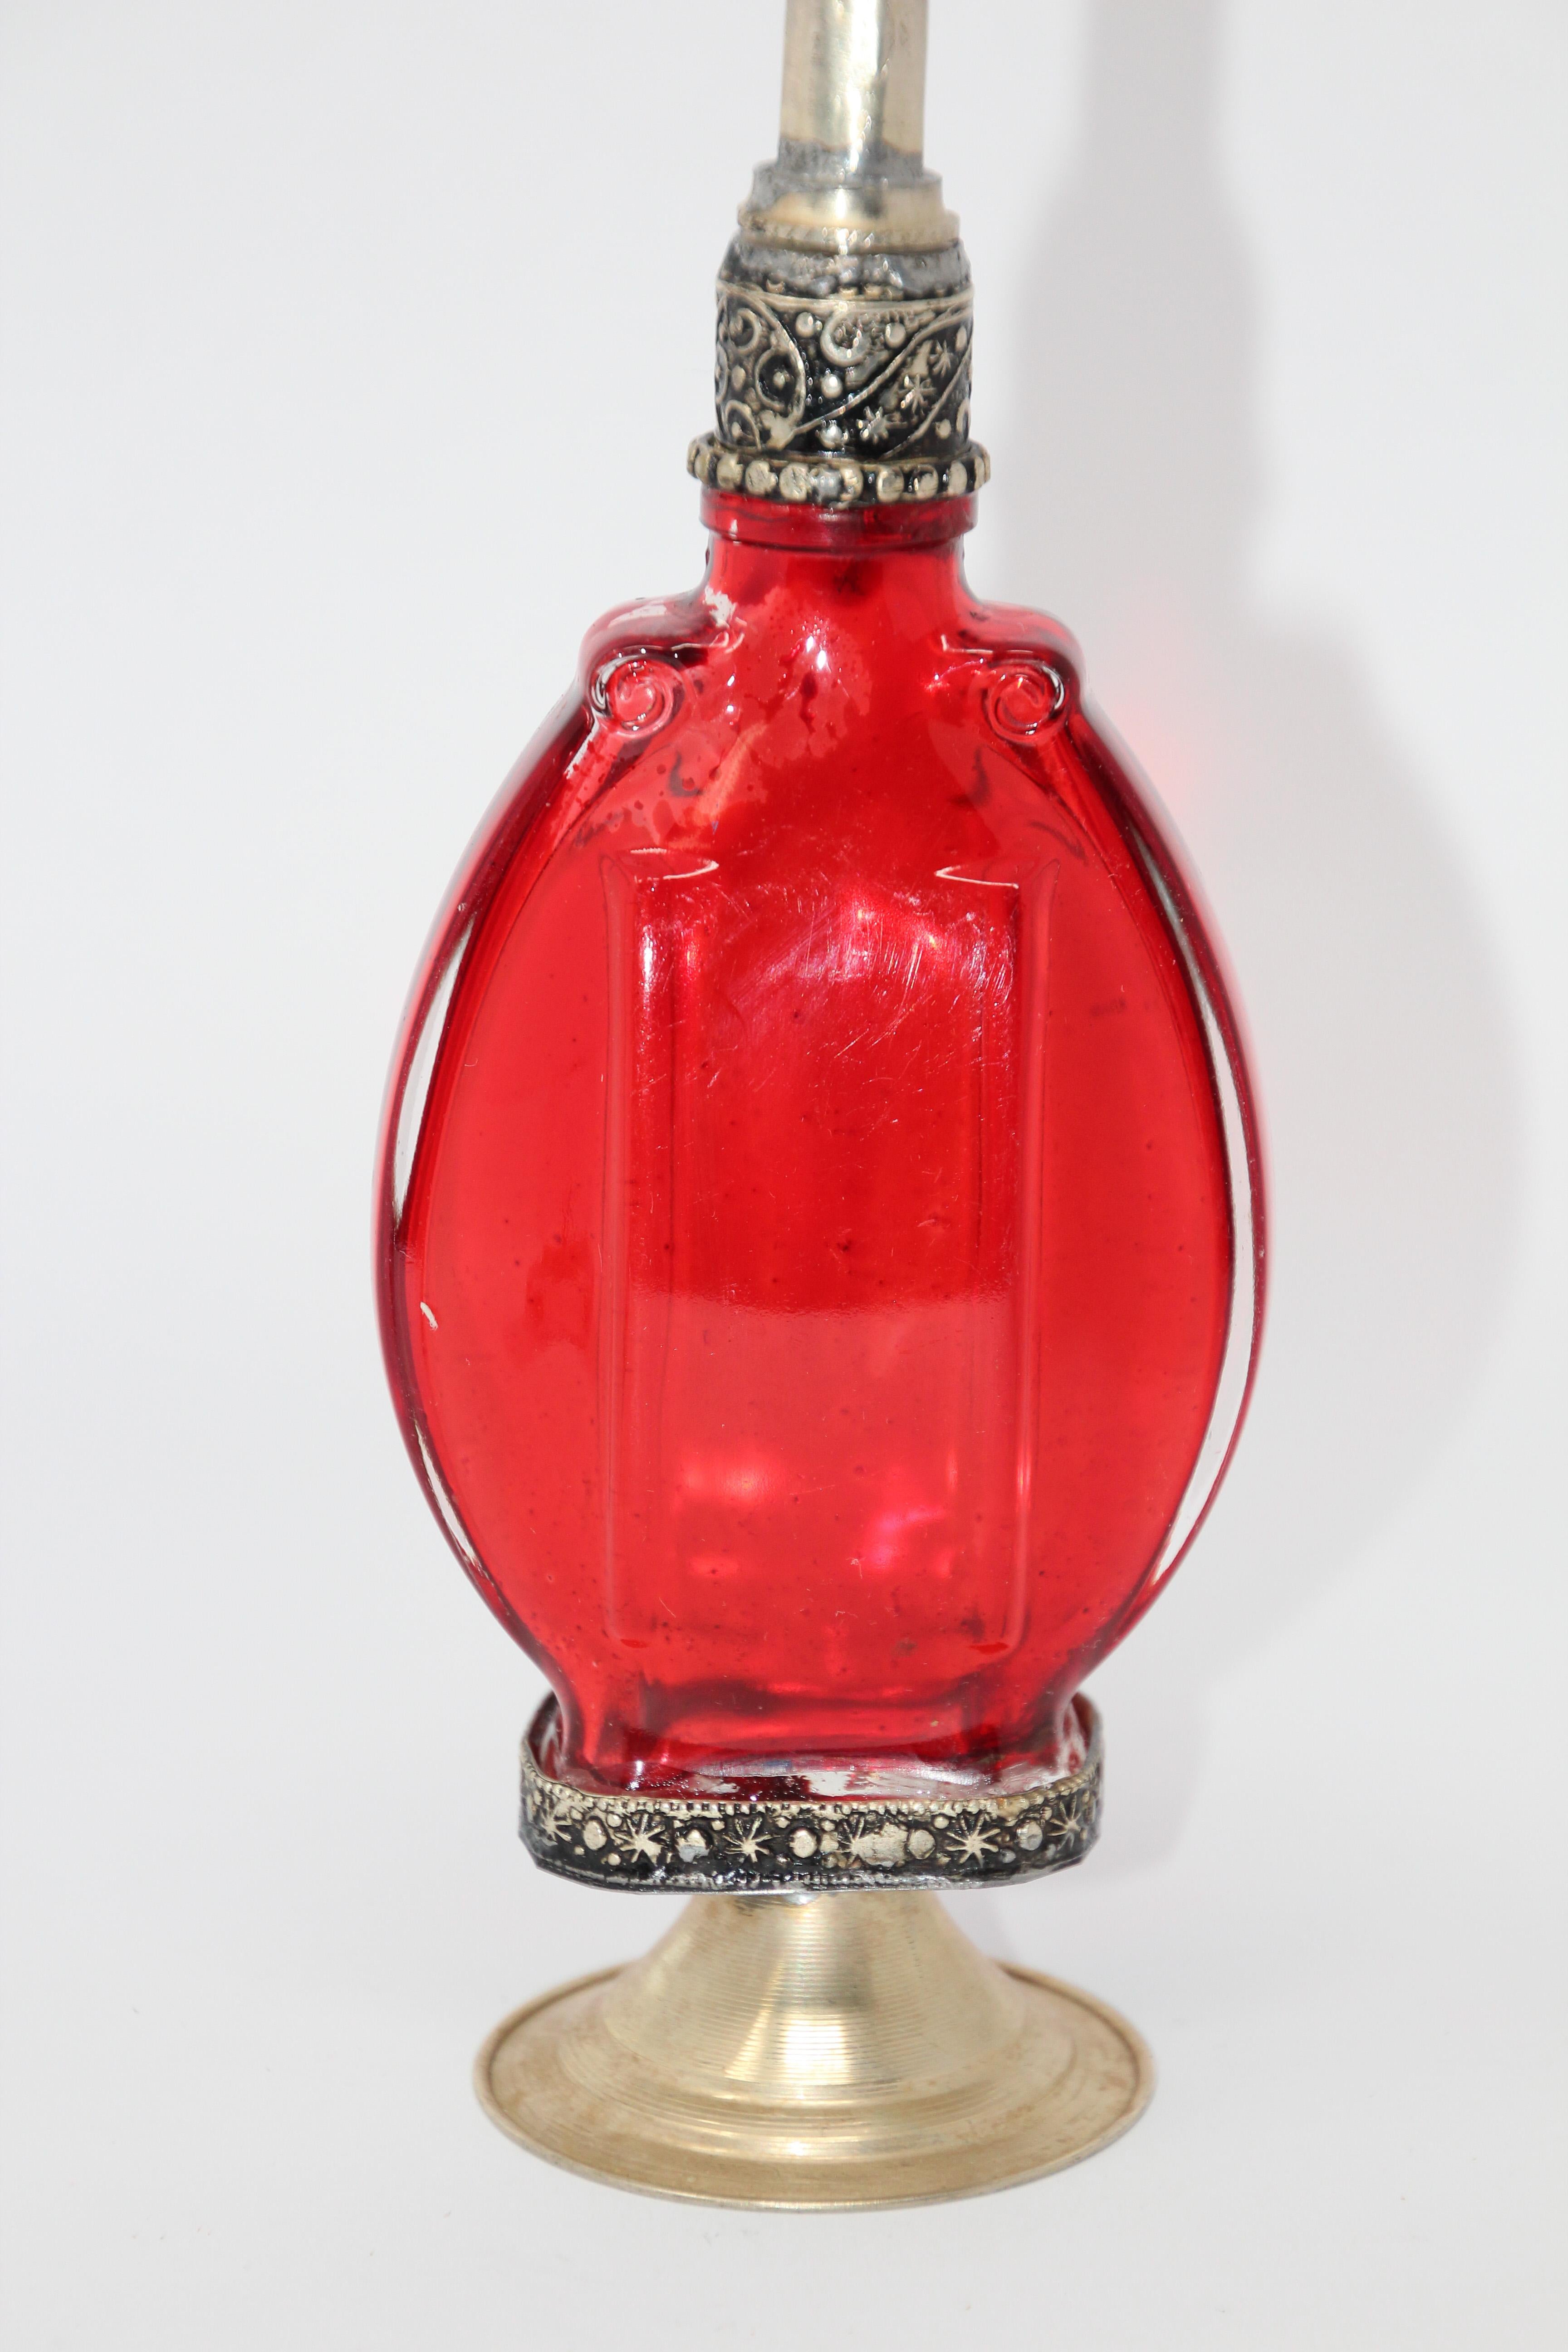 Handcrafted Moroccan Moorish red glass perfume bottle or rose water sprinkler with raised embossed silvered metal floral design over red glass.
The pressed glass bottle in Art Deco, Art Nouveau style is oval shape with curved sides and hand